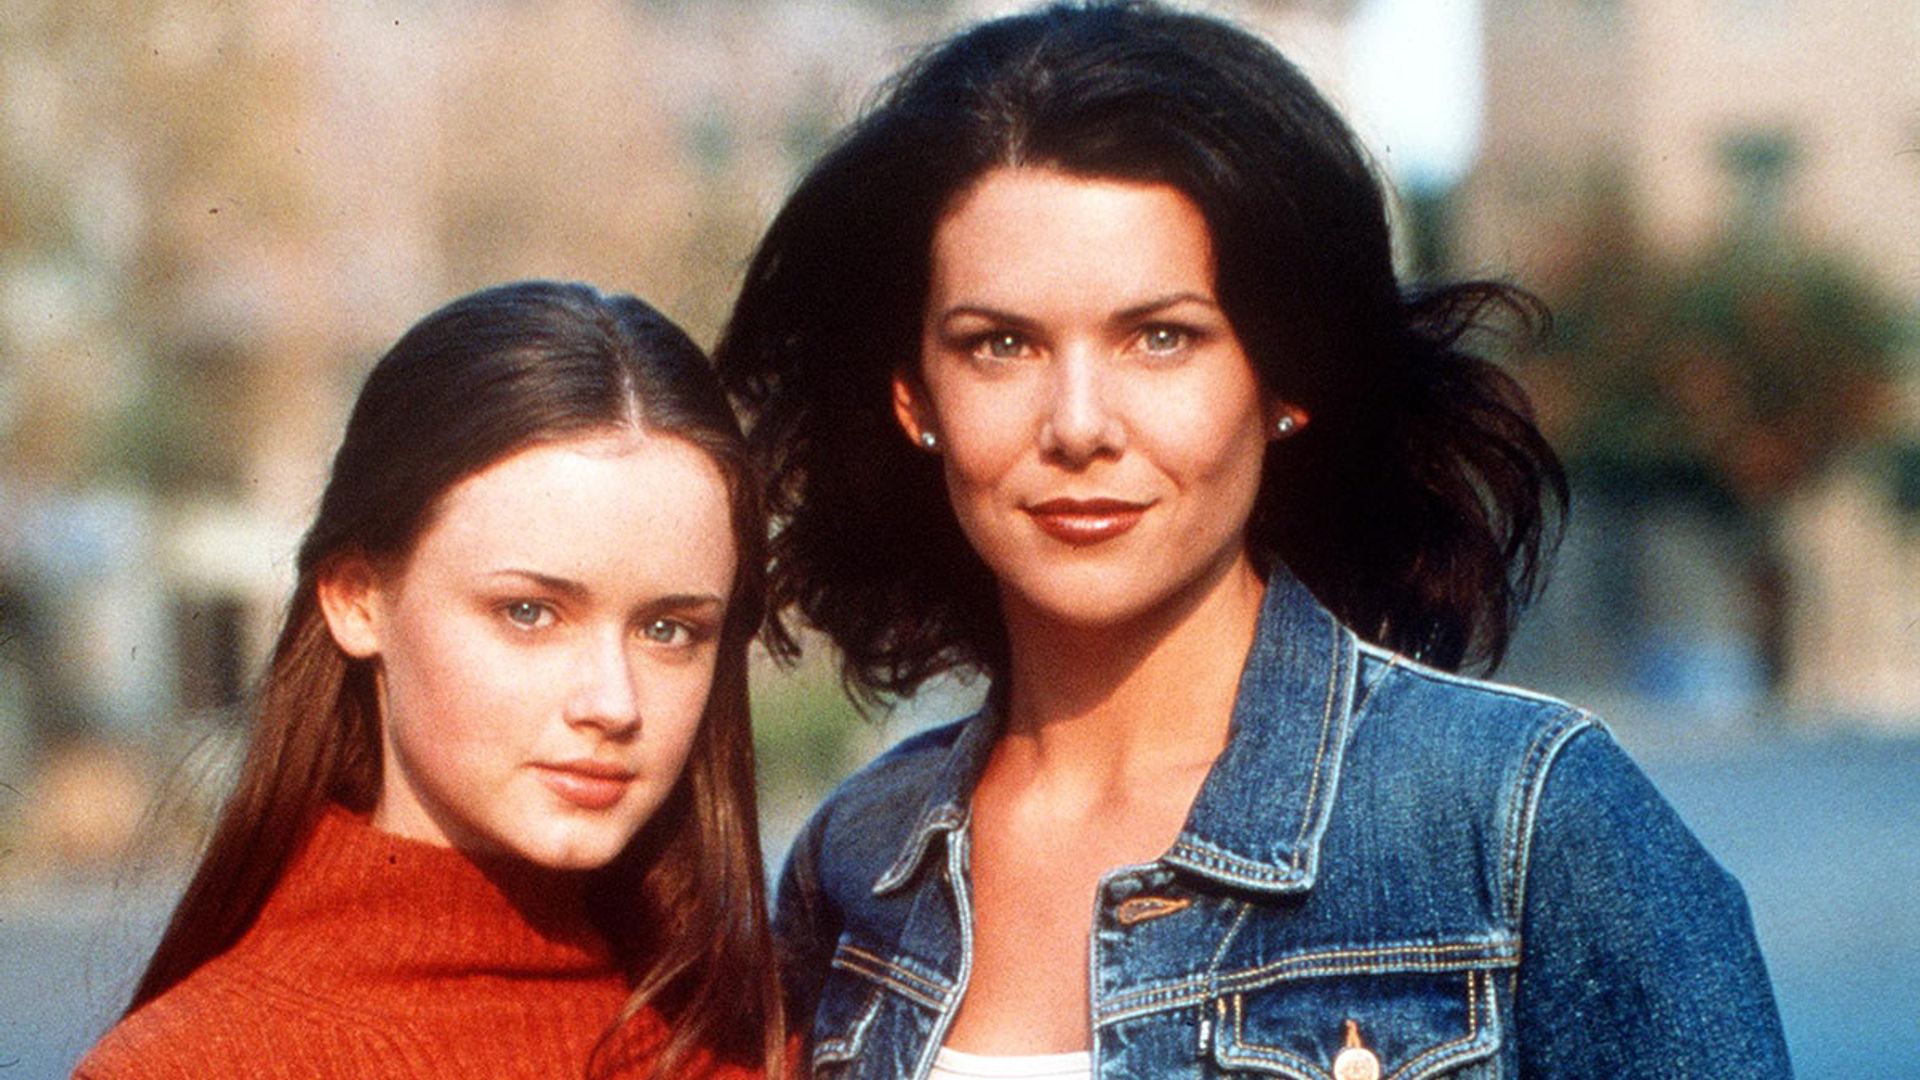 7 shows to watch if you love Gilmore Girls